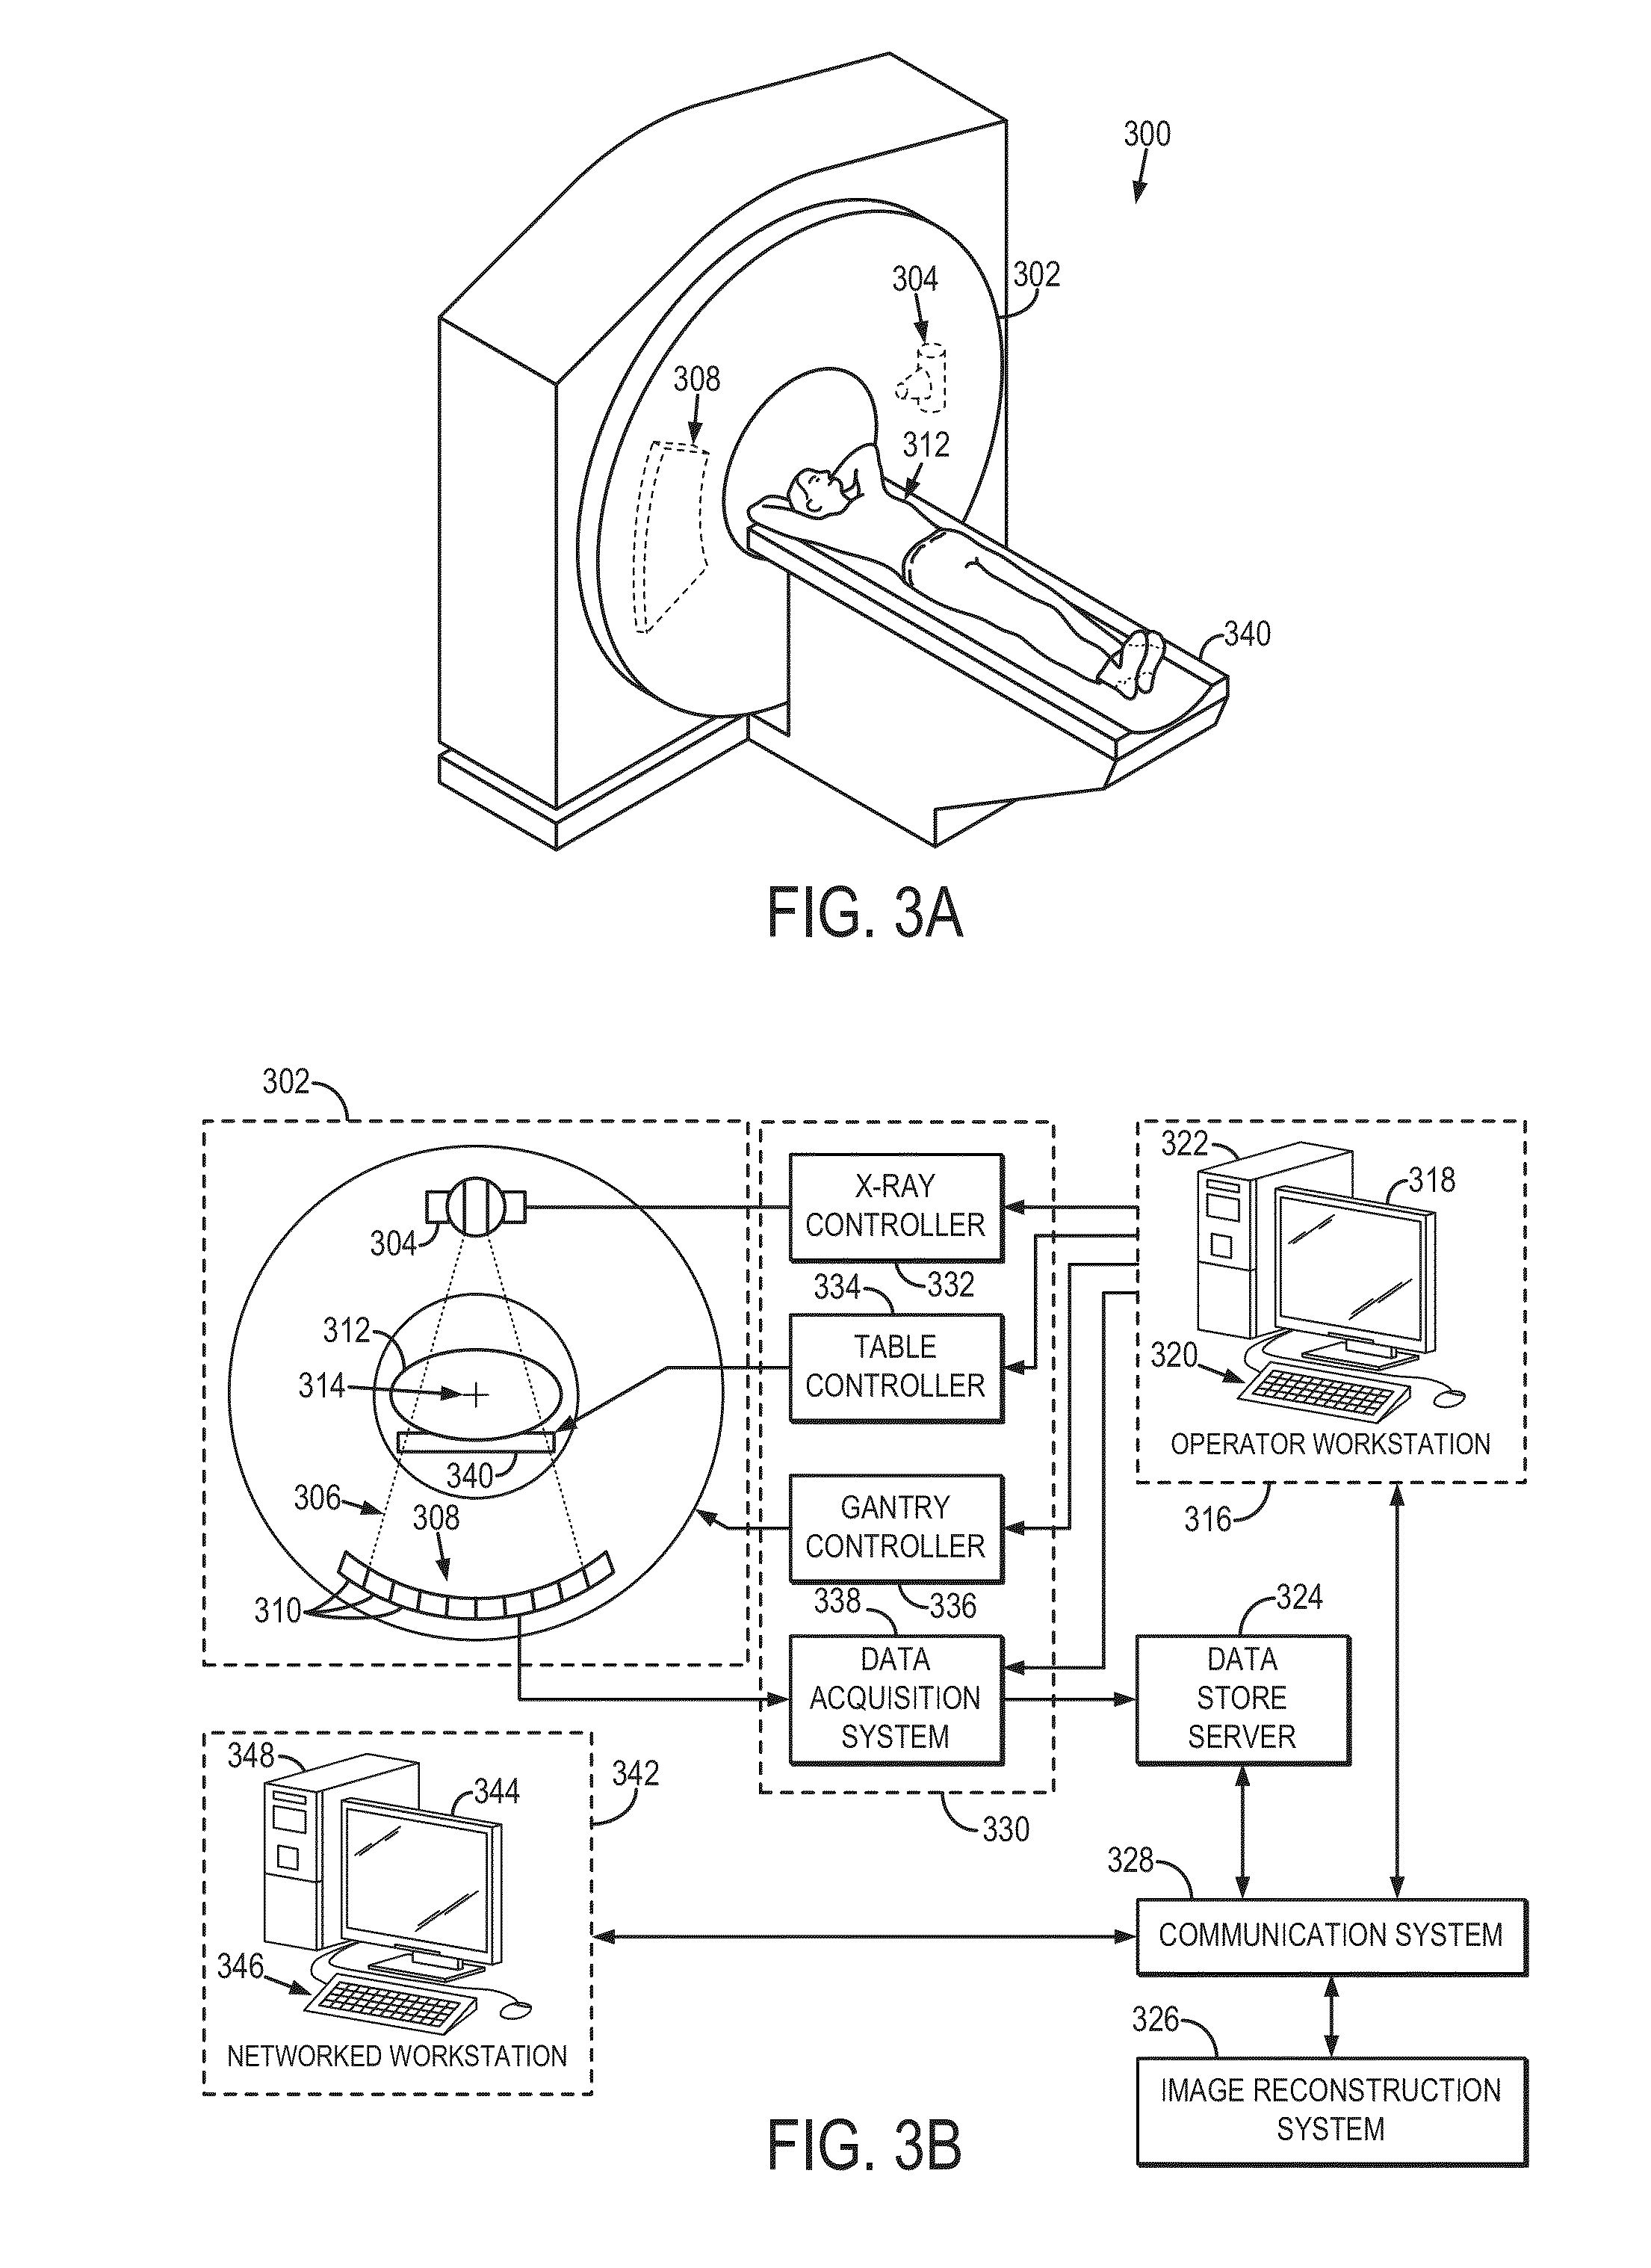 Systems And Methods For Noninvasive Spectral-Spatiotemporal Imaging of Cardiac Electrical Activity